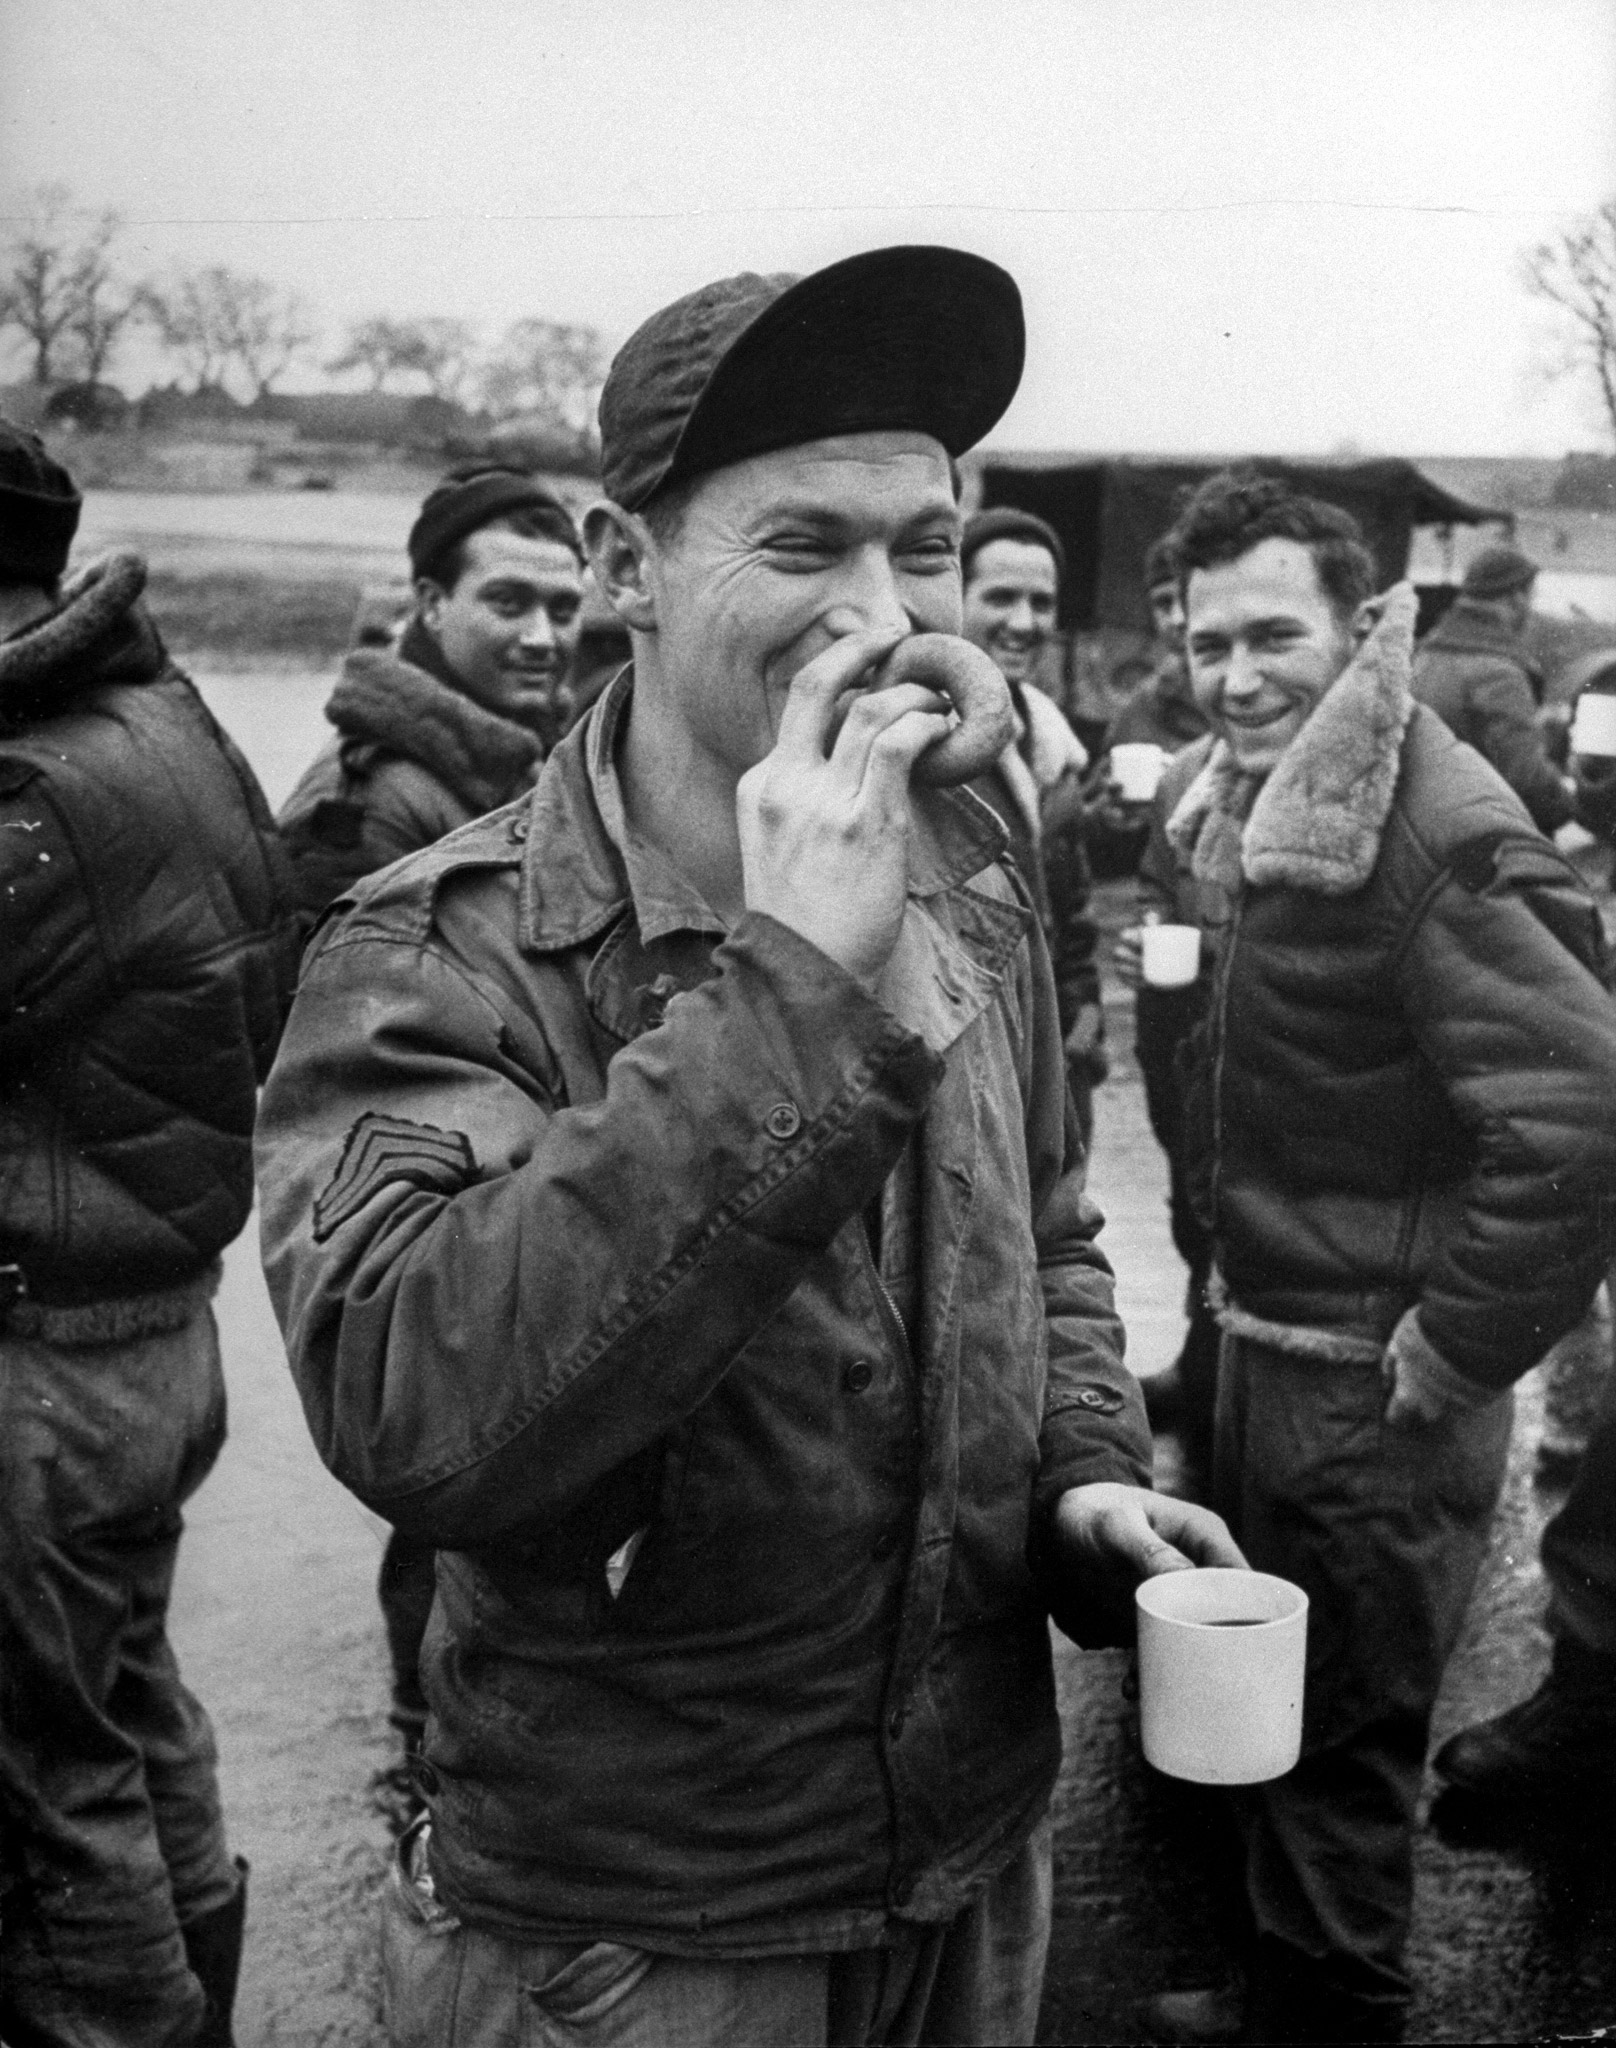 Happy sergeant with doughnut and coffee grins, greets the girls, "Seen ya' com in' a mile away."